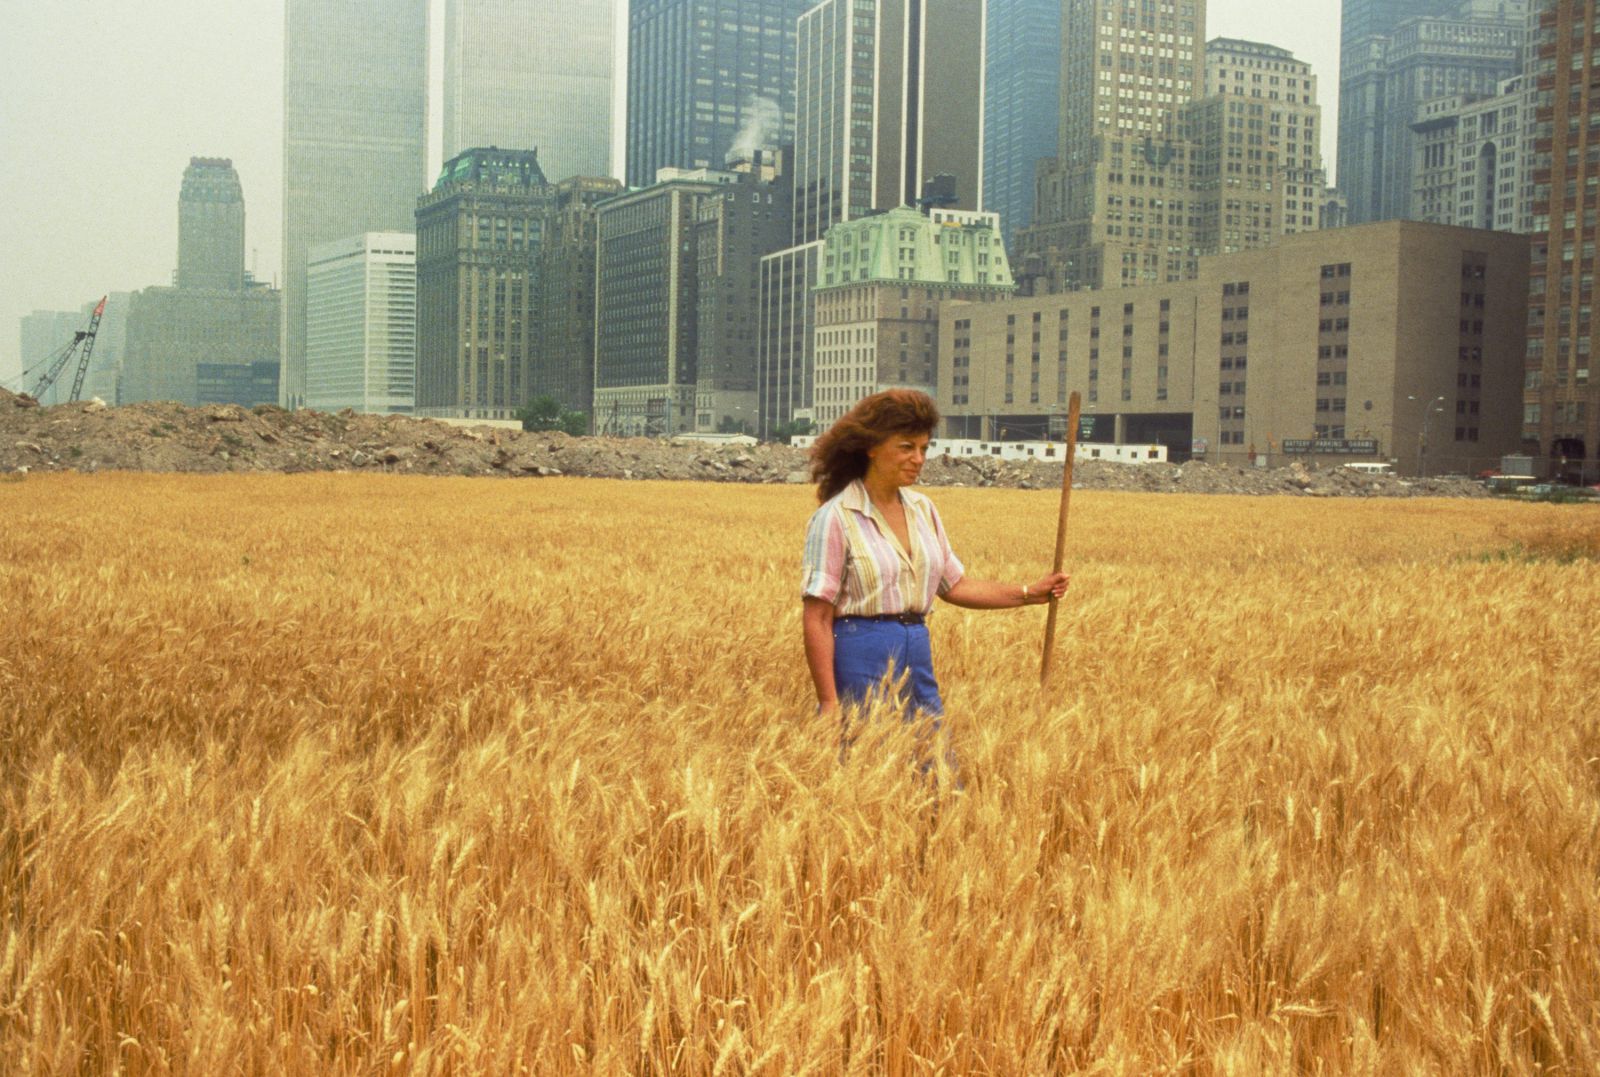 Agnes Denes, Wheatfield—A Confrontation: Battery Park Landfill, Downtown Manhattan—With Agnes Denes Standing in the Field, 1982. Photo: John McGrail. Courtesy of Agnes Denes and Leslie Tonkonow Artworks + Projects.